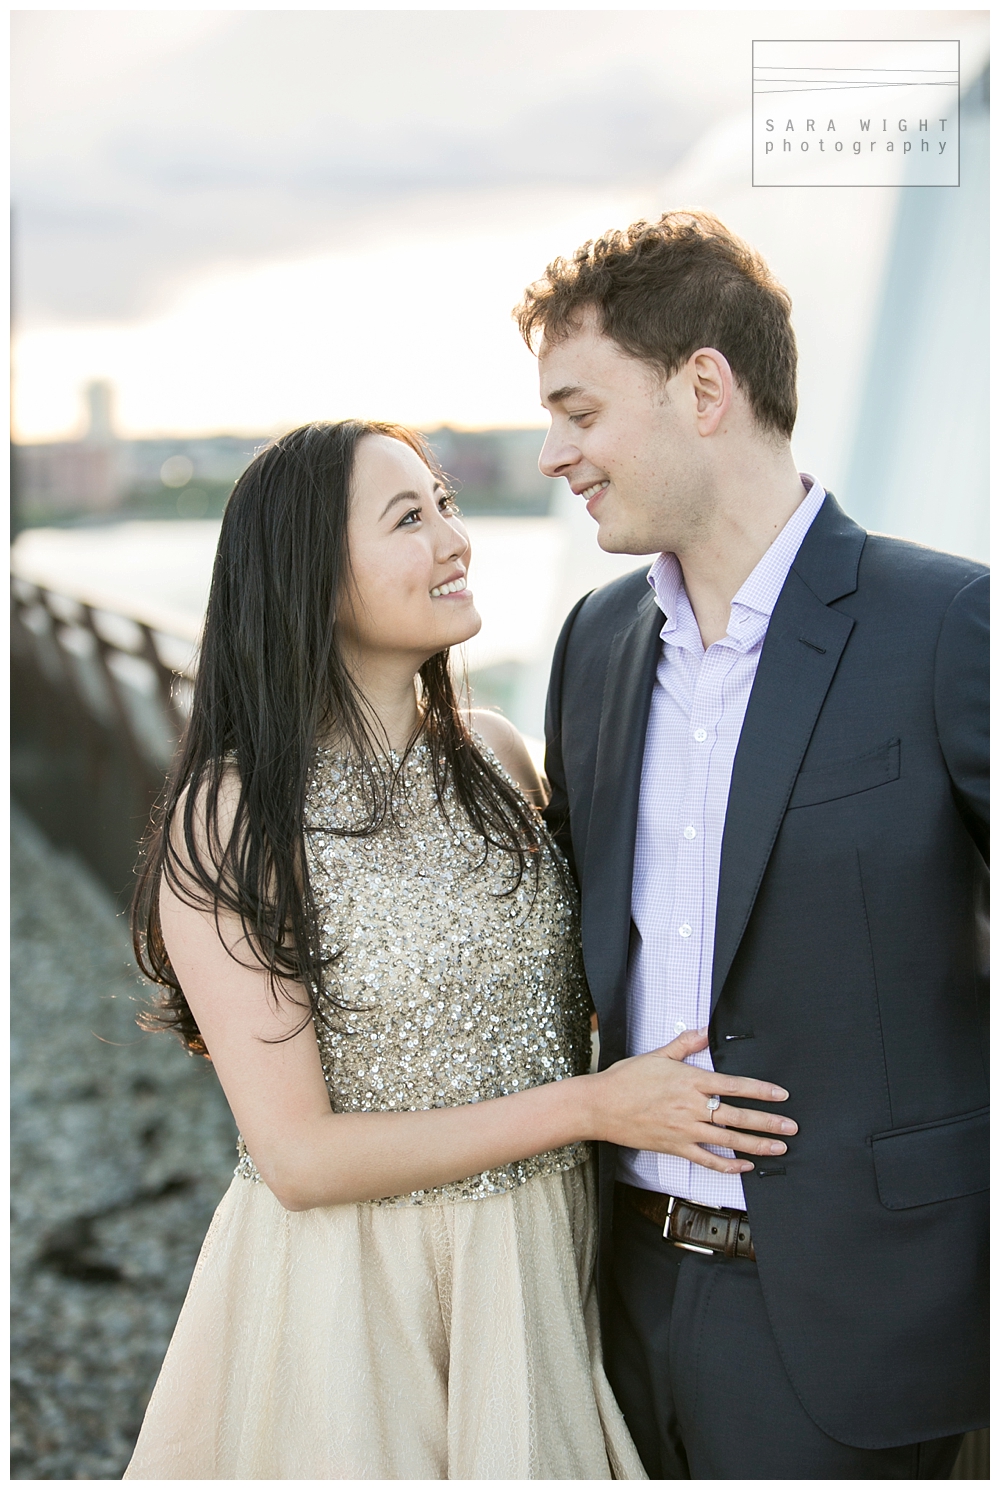 SaraWightPhotography_HighLineEngagementSession_0008a